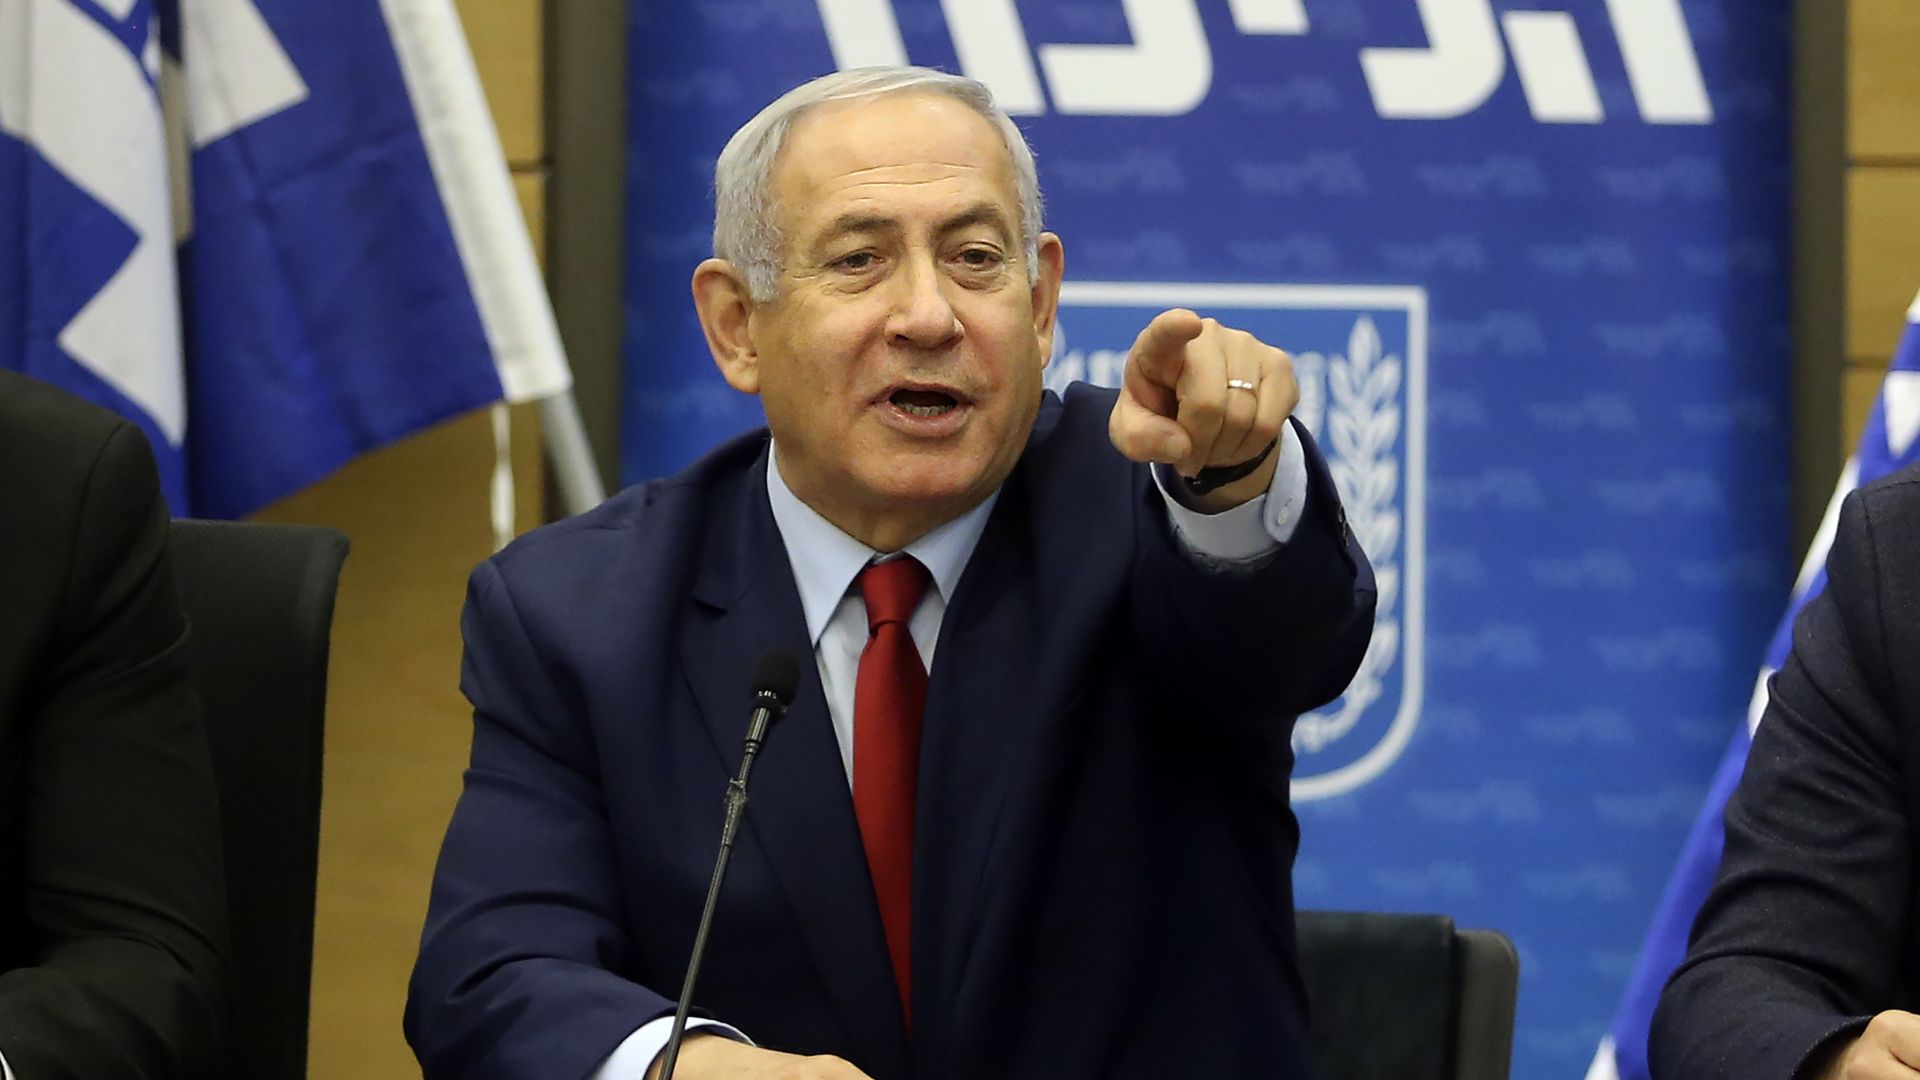 Netanyahu delivers a statement at the Israeli Parliament